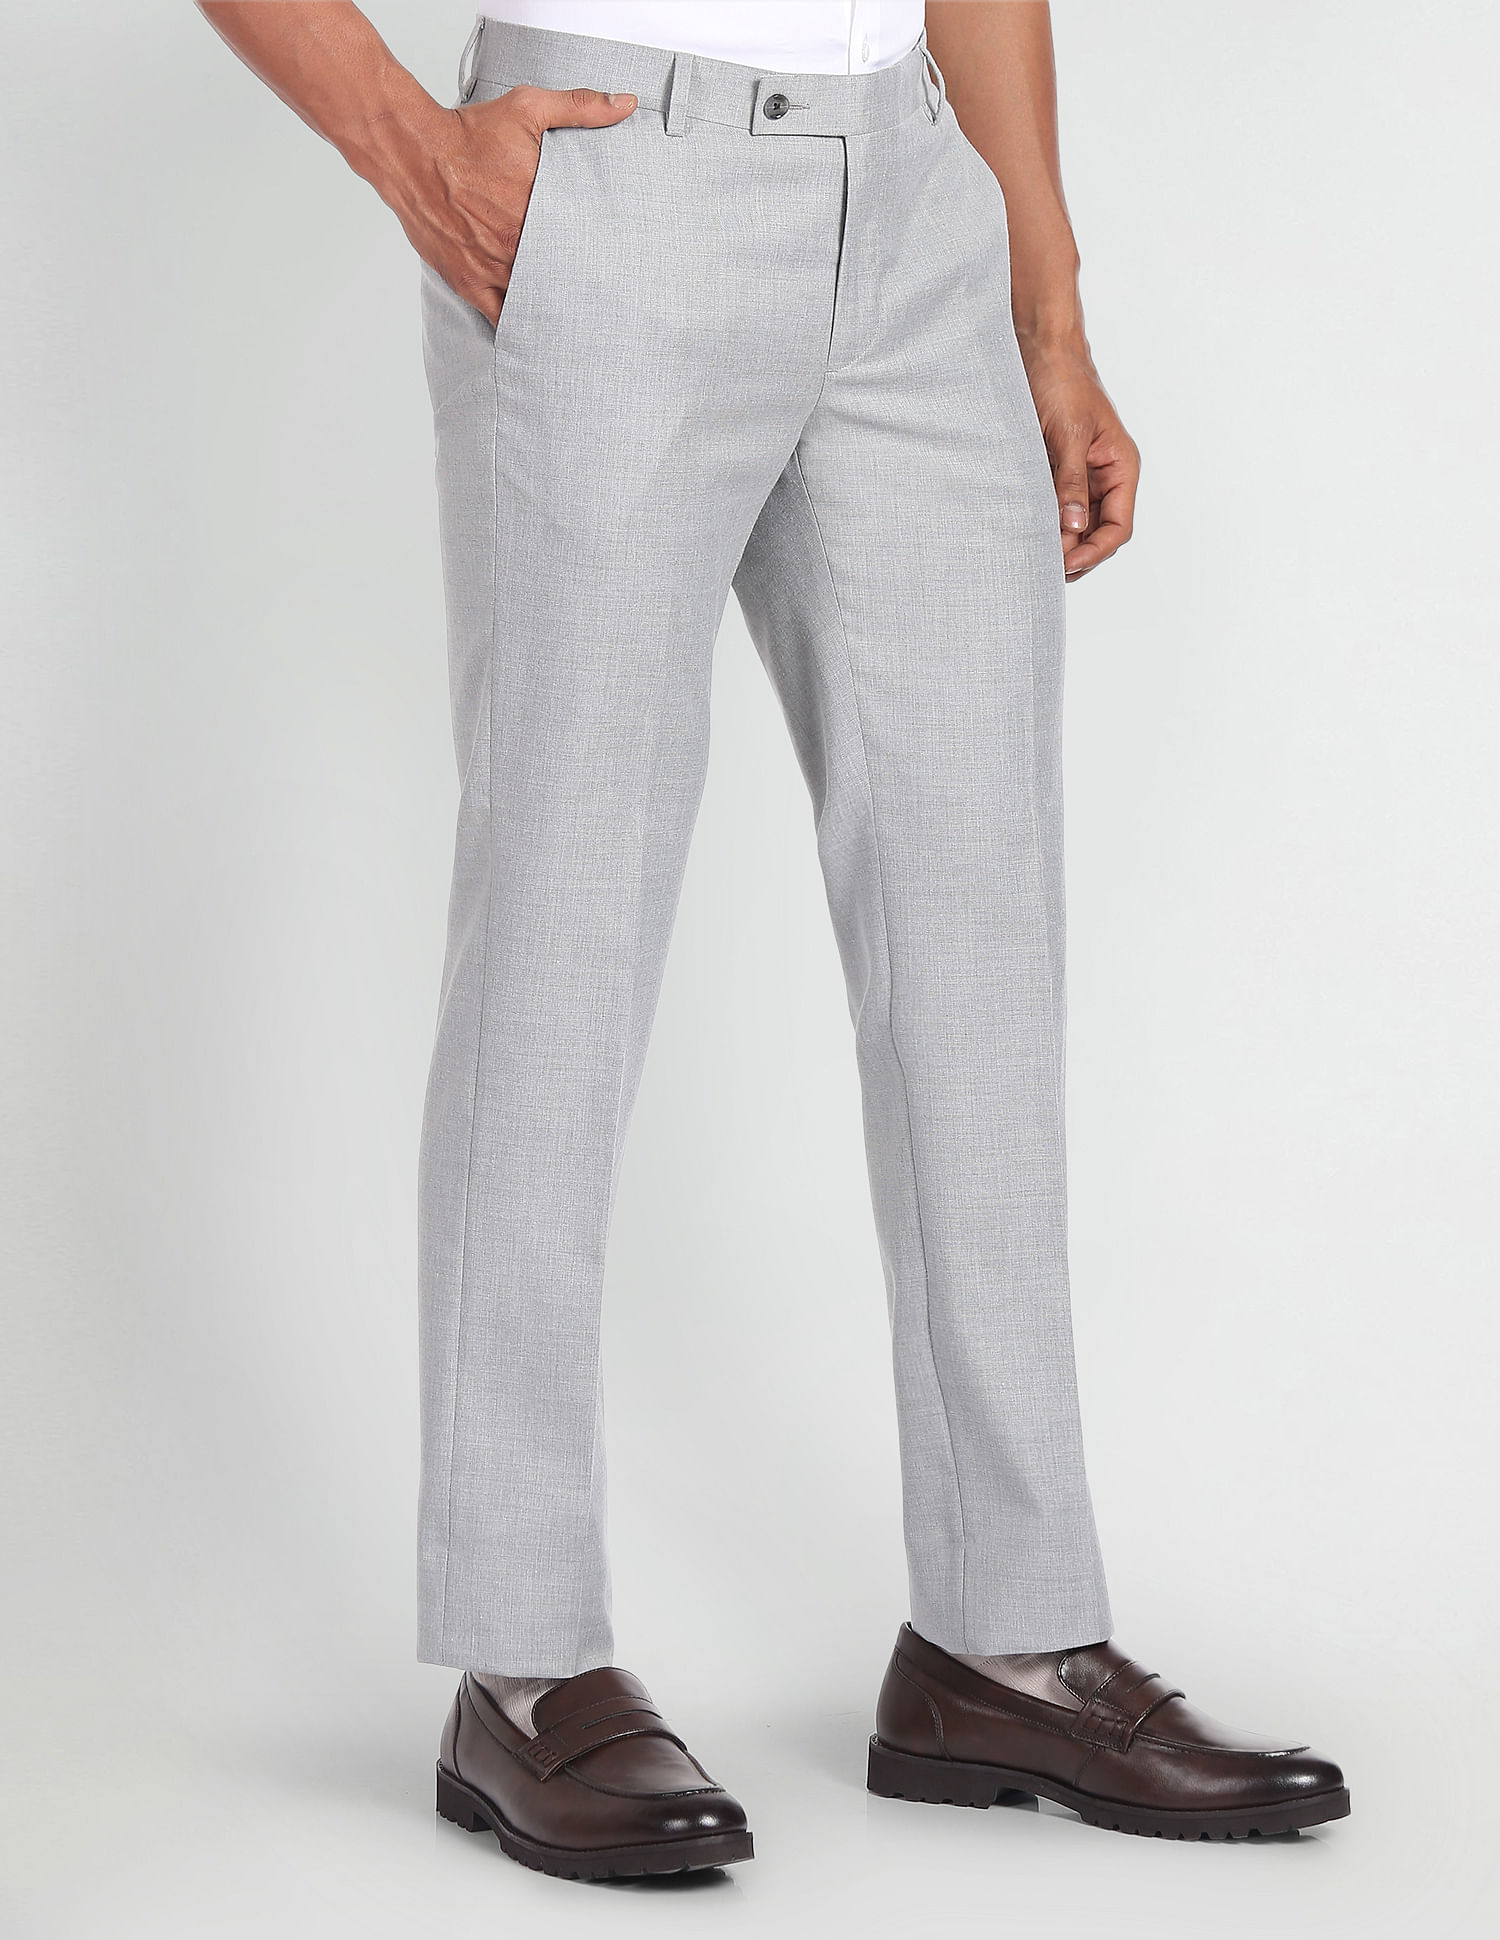 arrow men's pleat-front formal trousers at Best Price ₹ 1574 with many  options Only in India at MartAvenue.com - Mart Avenue - MartAvenue